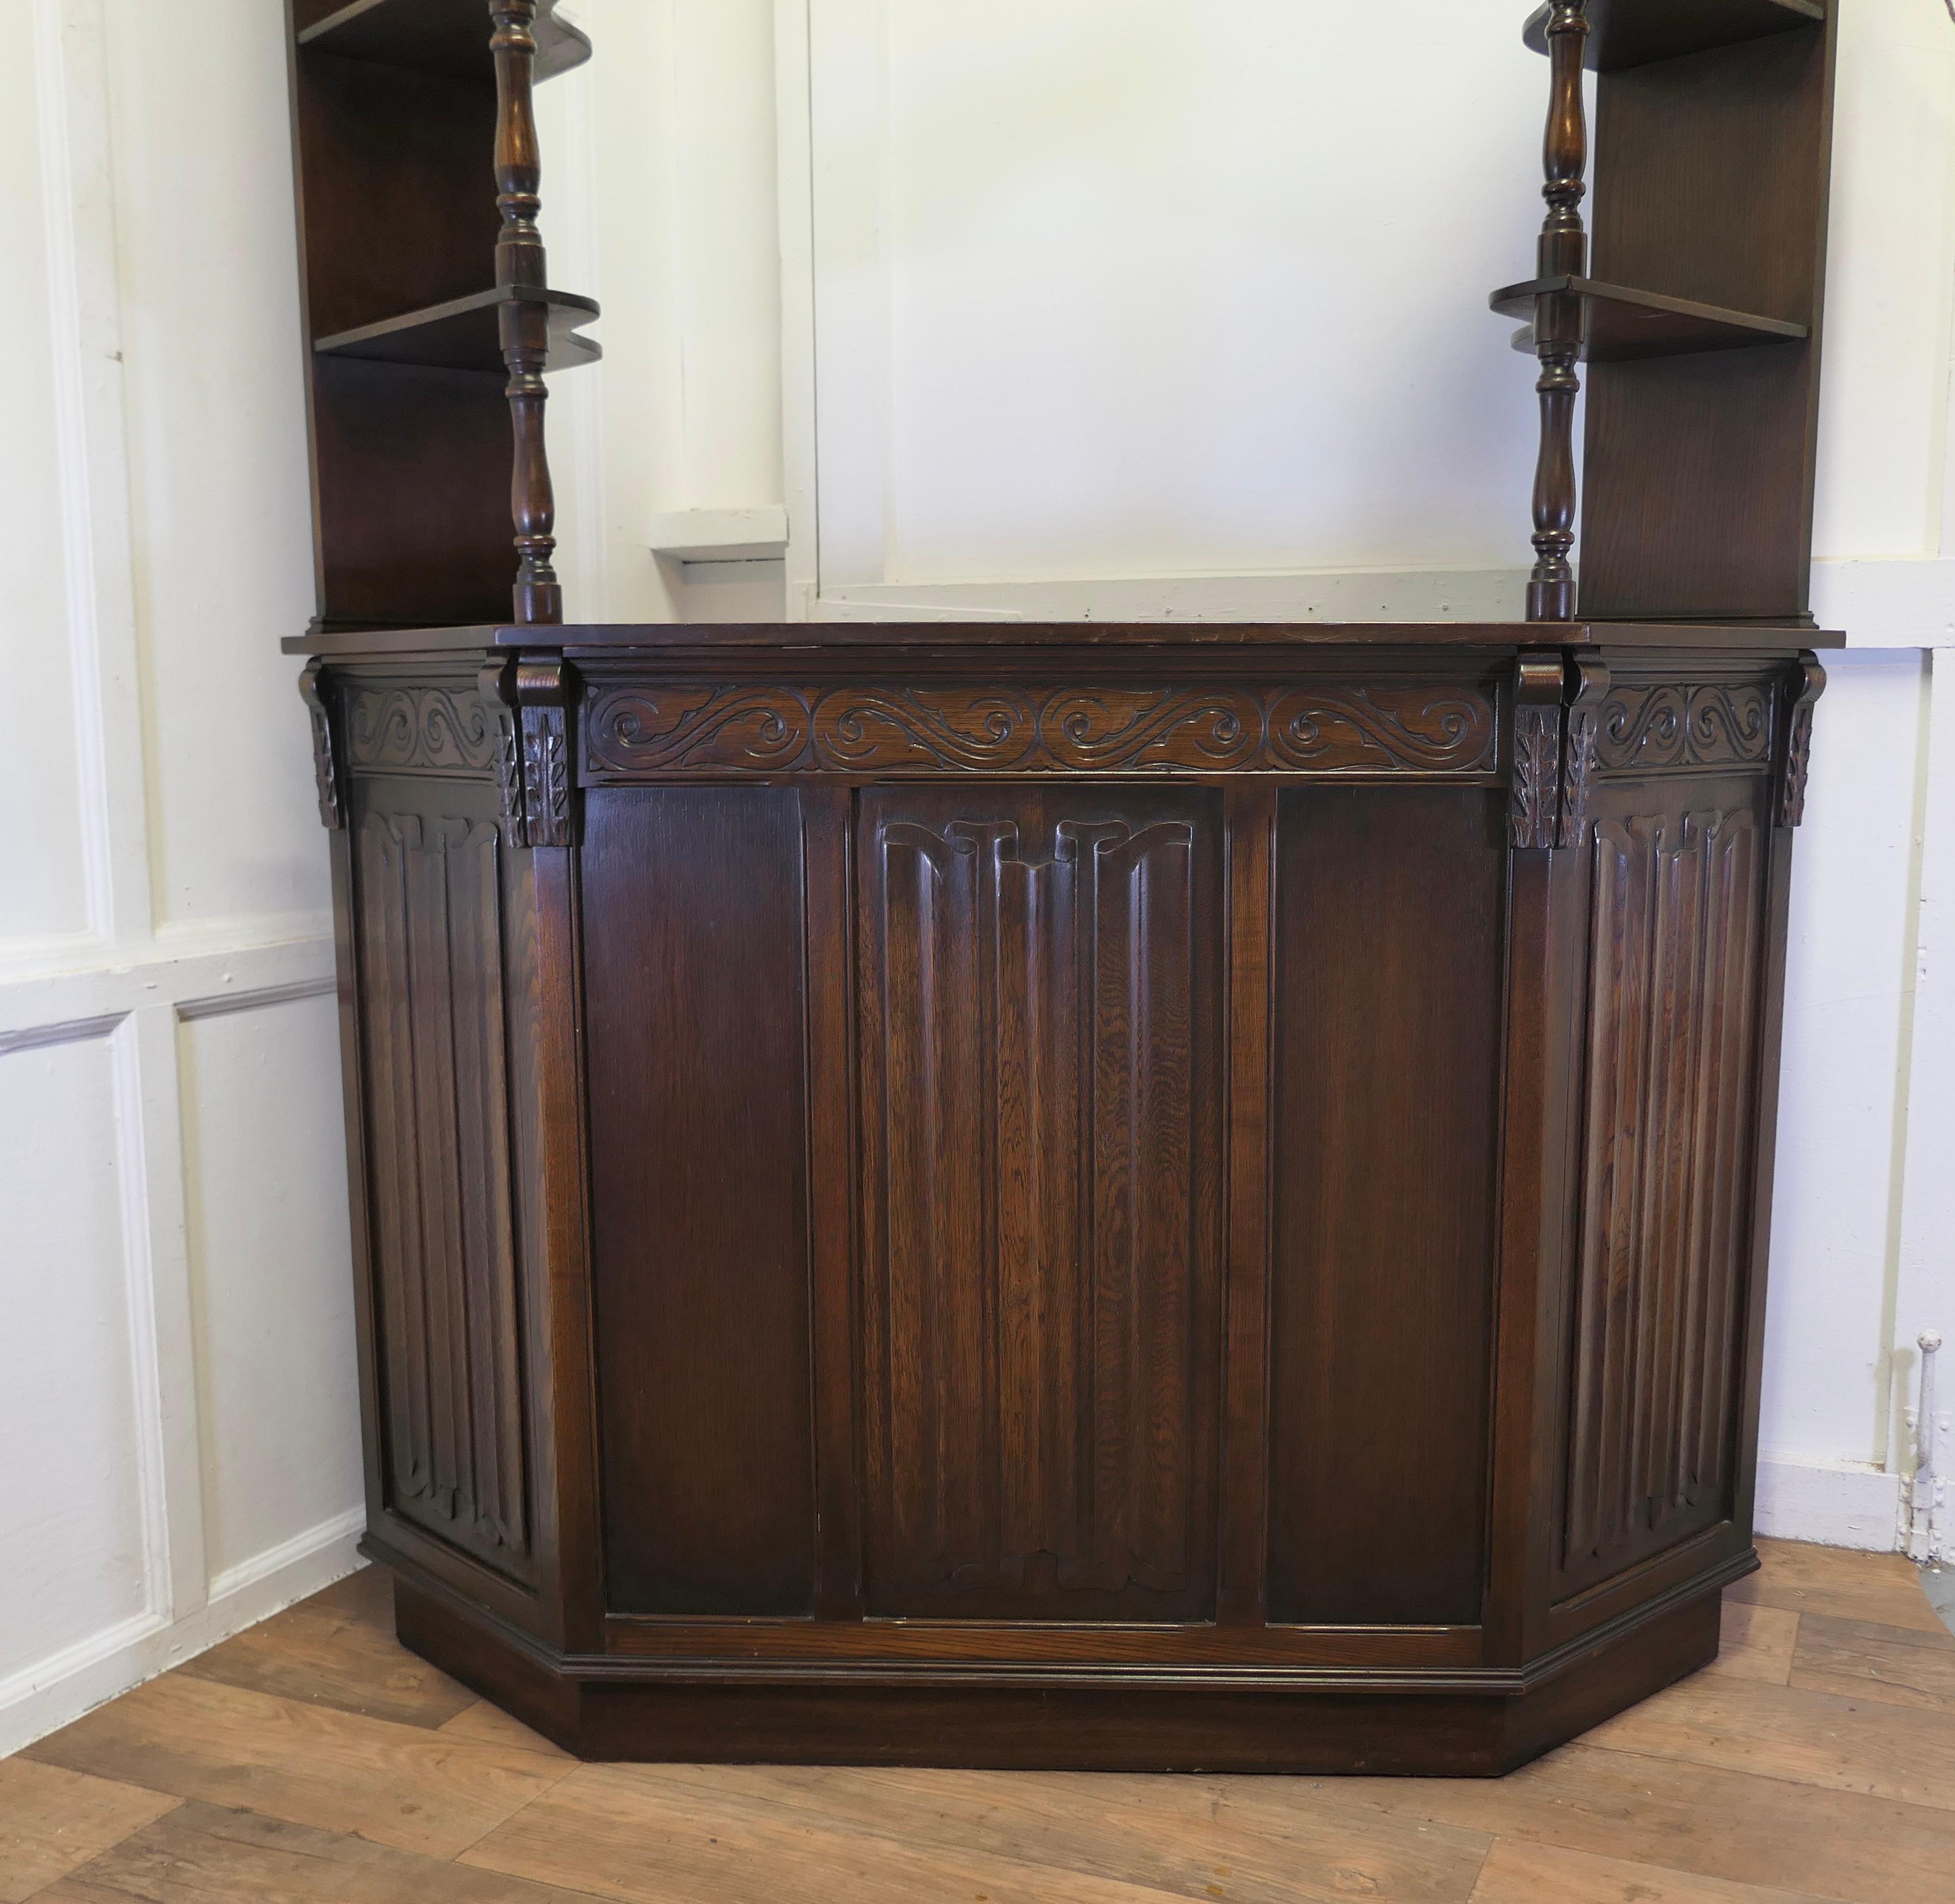 Gothic Revival Country House Hostess Greeting Station, Reception Bar    For Sale